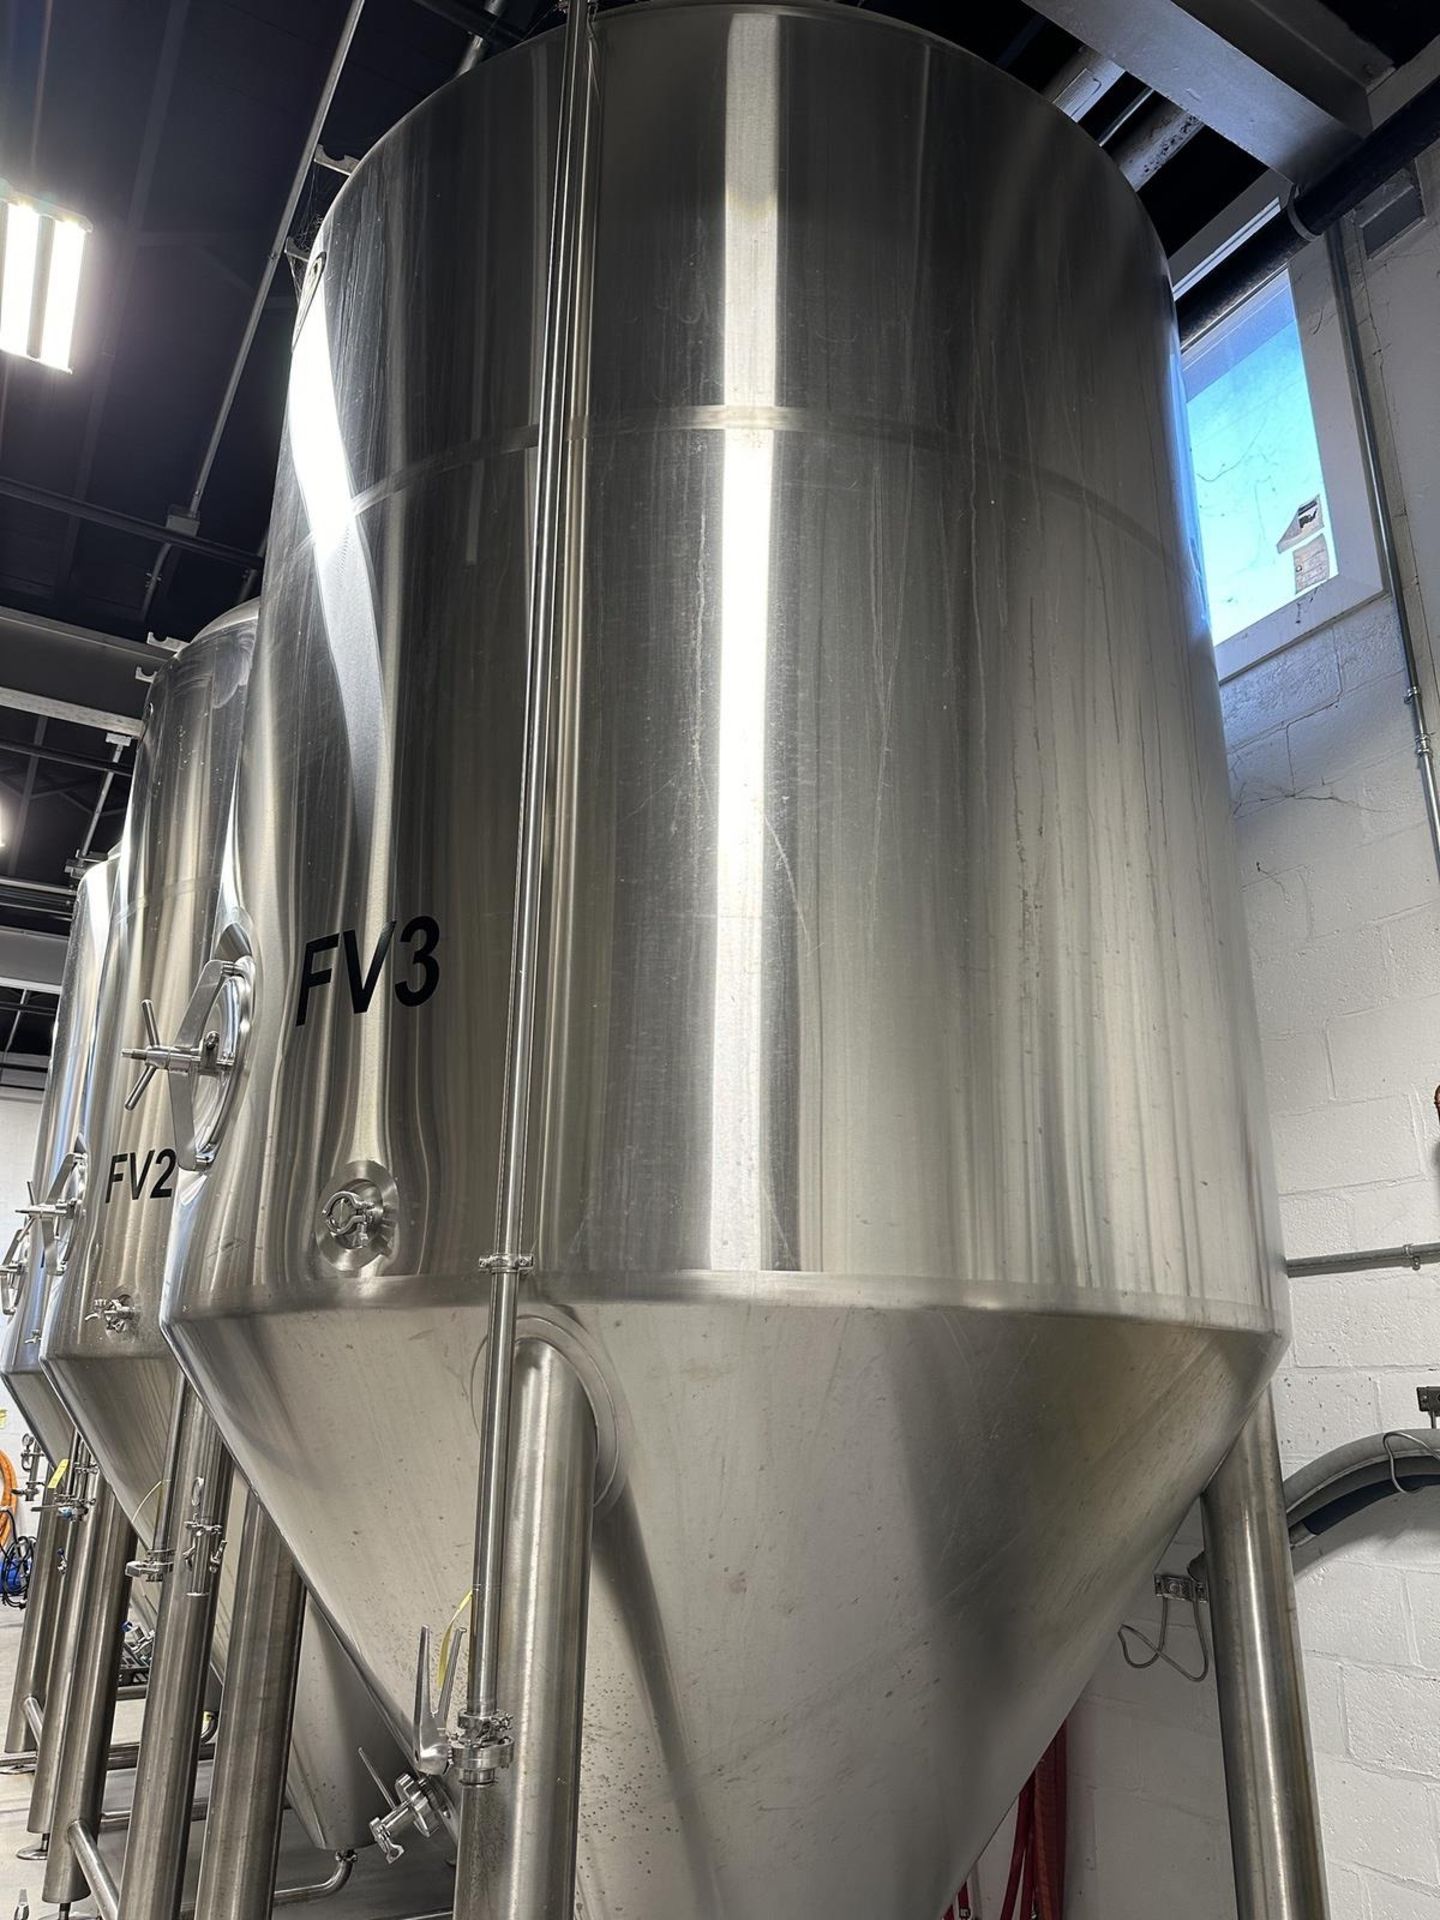 2016 ABE 90 BBL Jacketed Fermenter (FV 3), Approx. 16' H x 8' OD | Rig Fee $2600 - Image 3 of 3